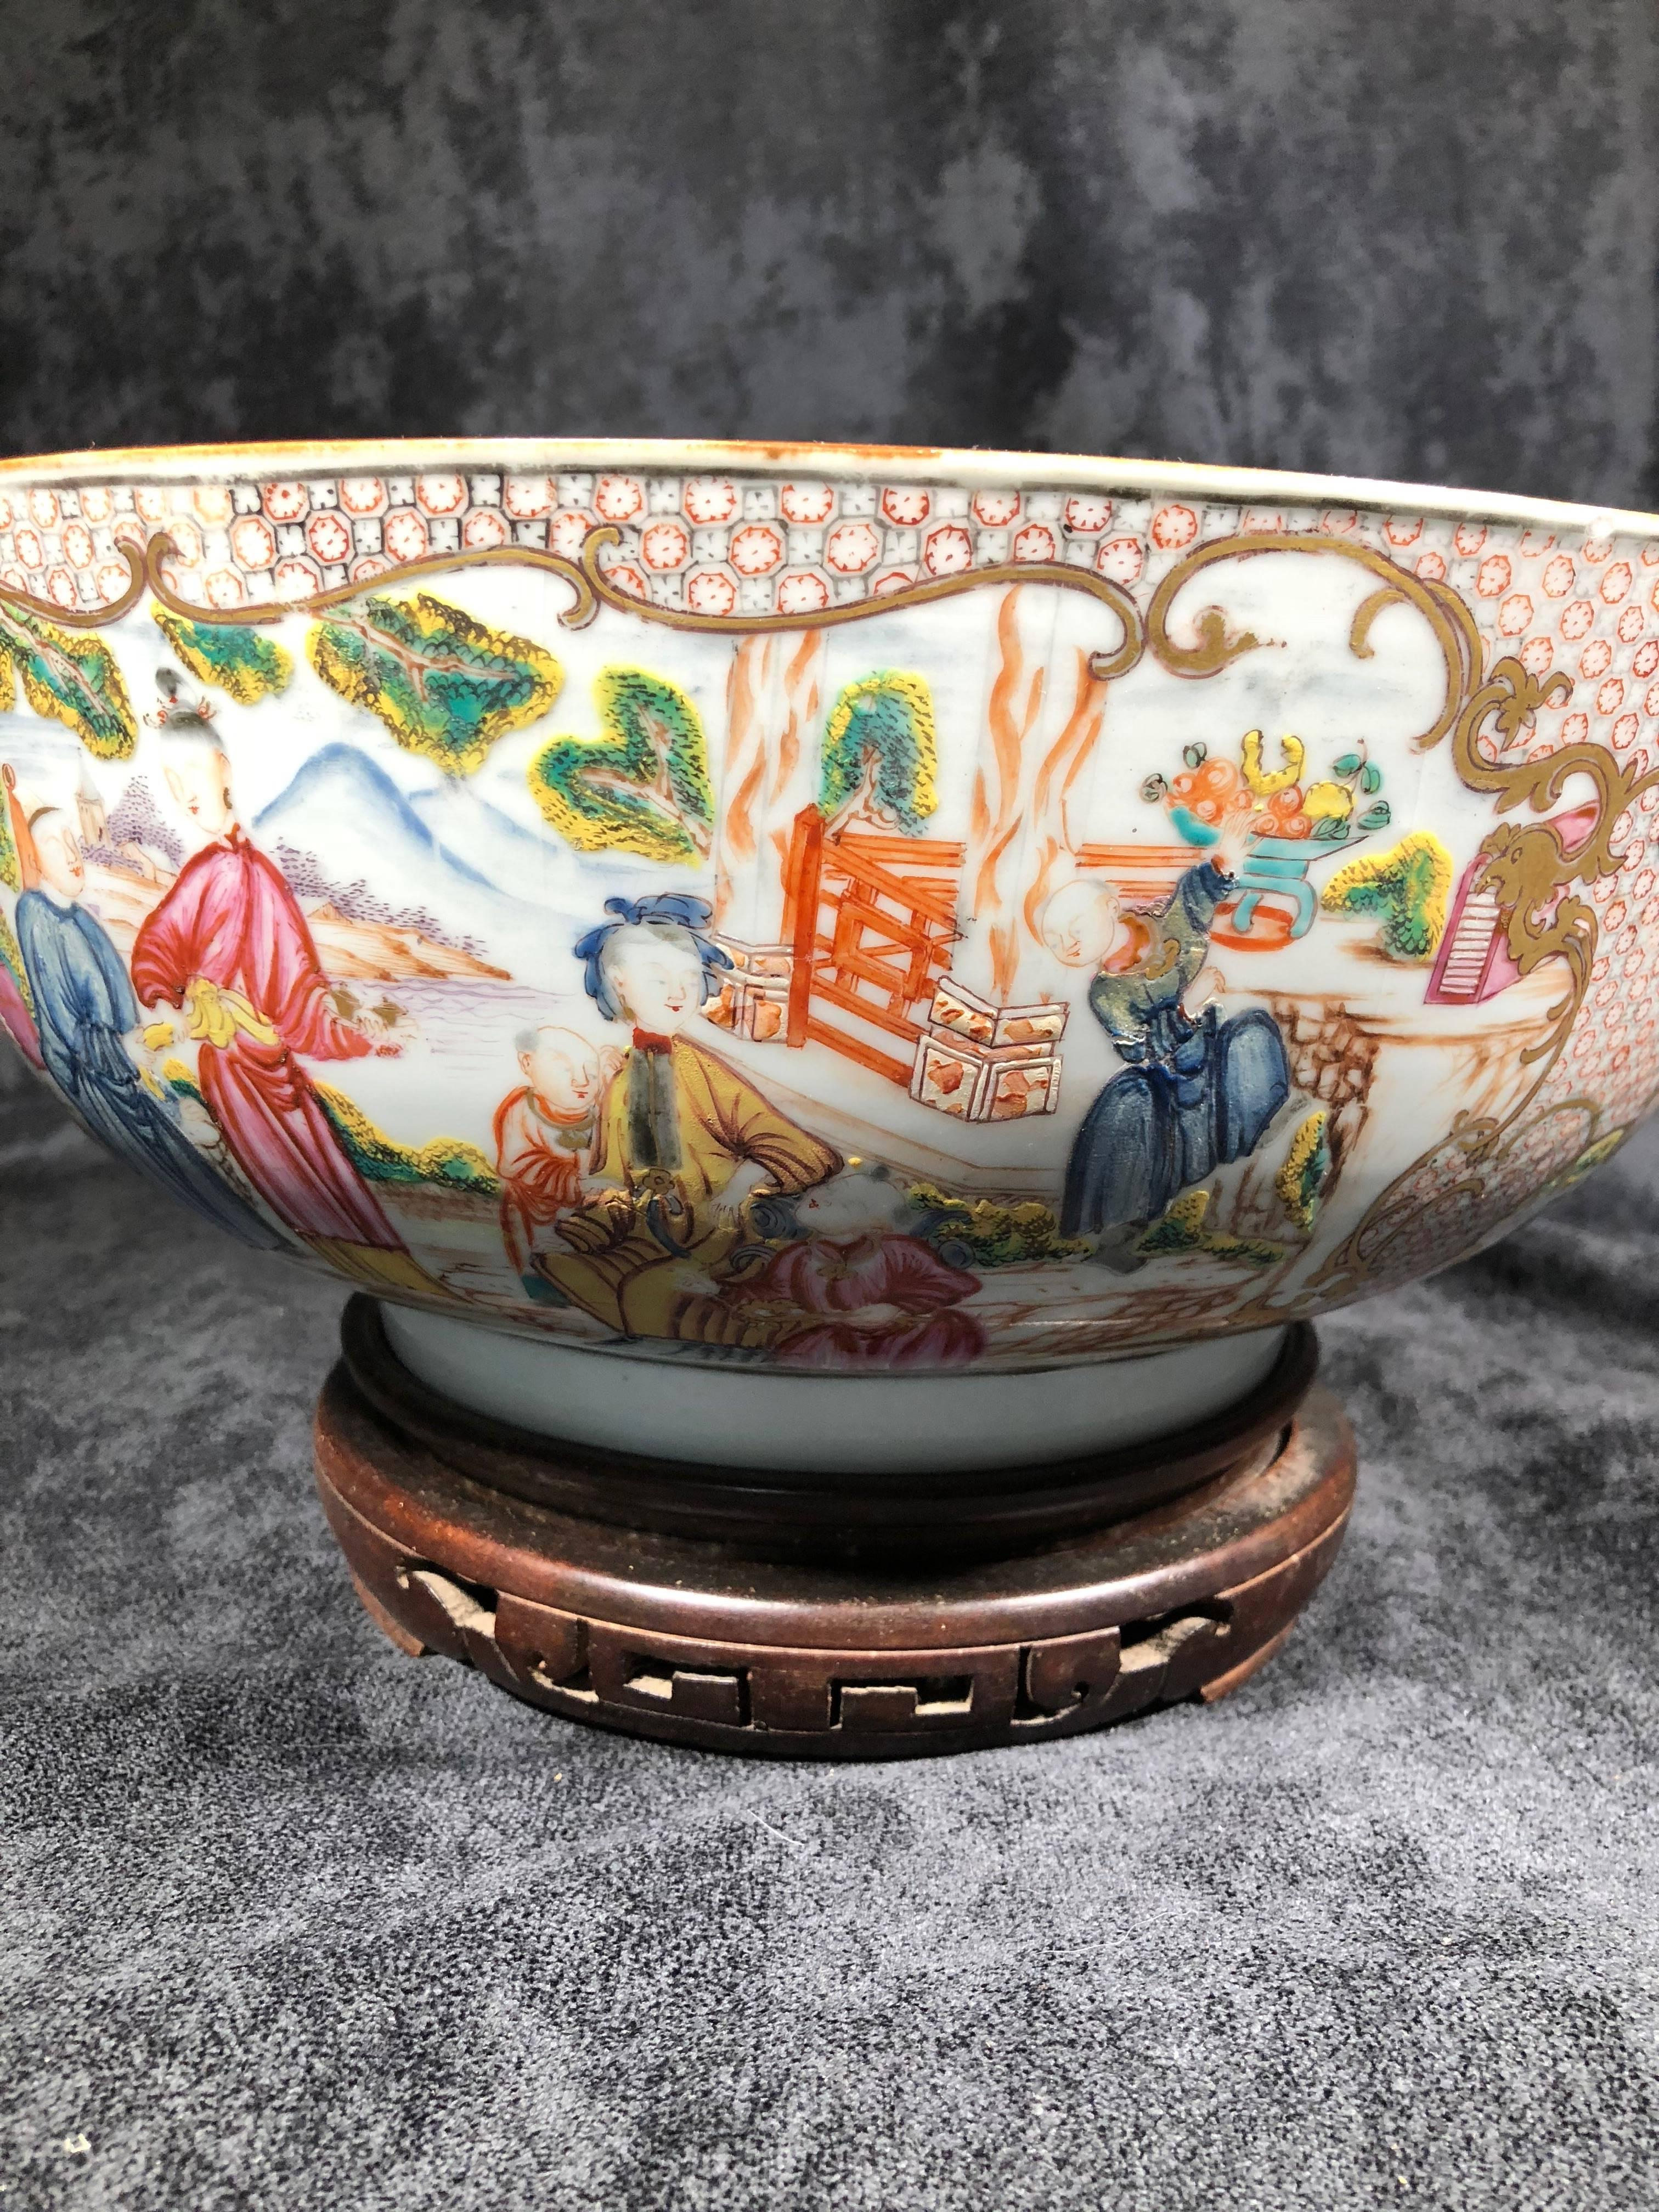 18th Century Chinese Qianlong Export Ware Porcelain Punch Bowl In Good Condition For Sale In Harrogate, GB